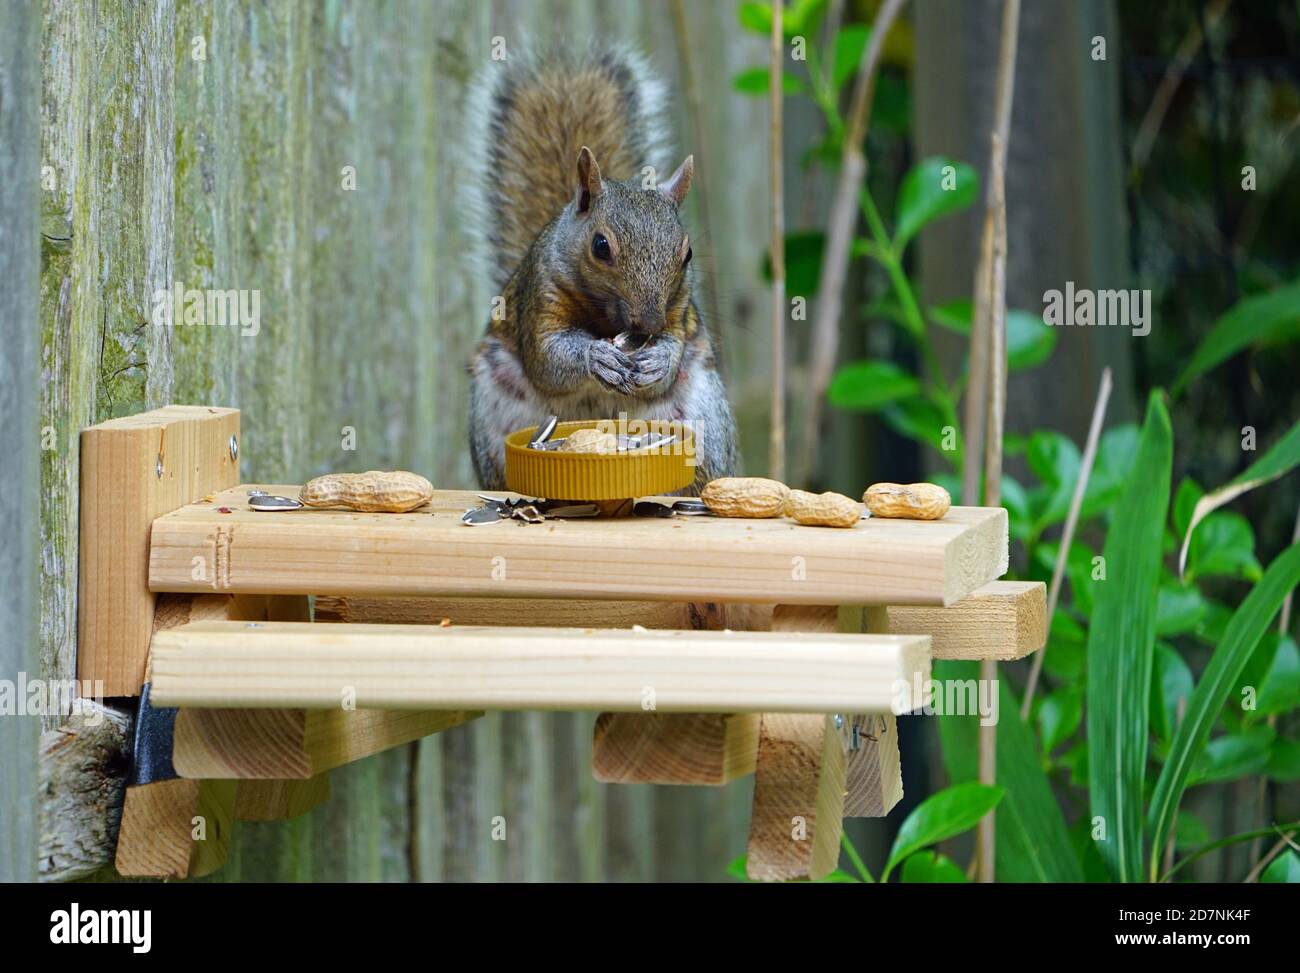 A gray squirrel eating at a backyard wooden picnic table for squirrels and  birds mounted on a garden fence Stock Photo - Alamy